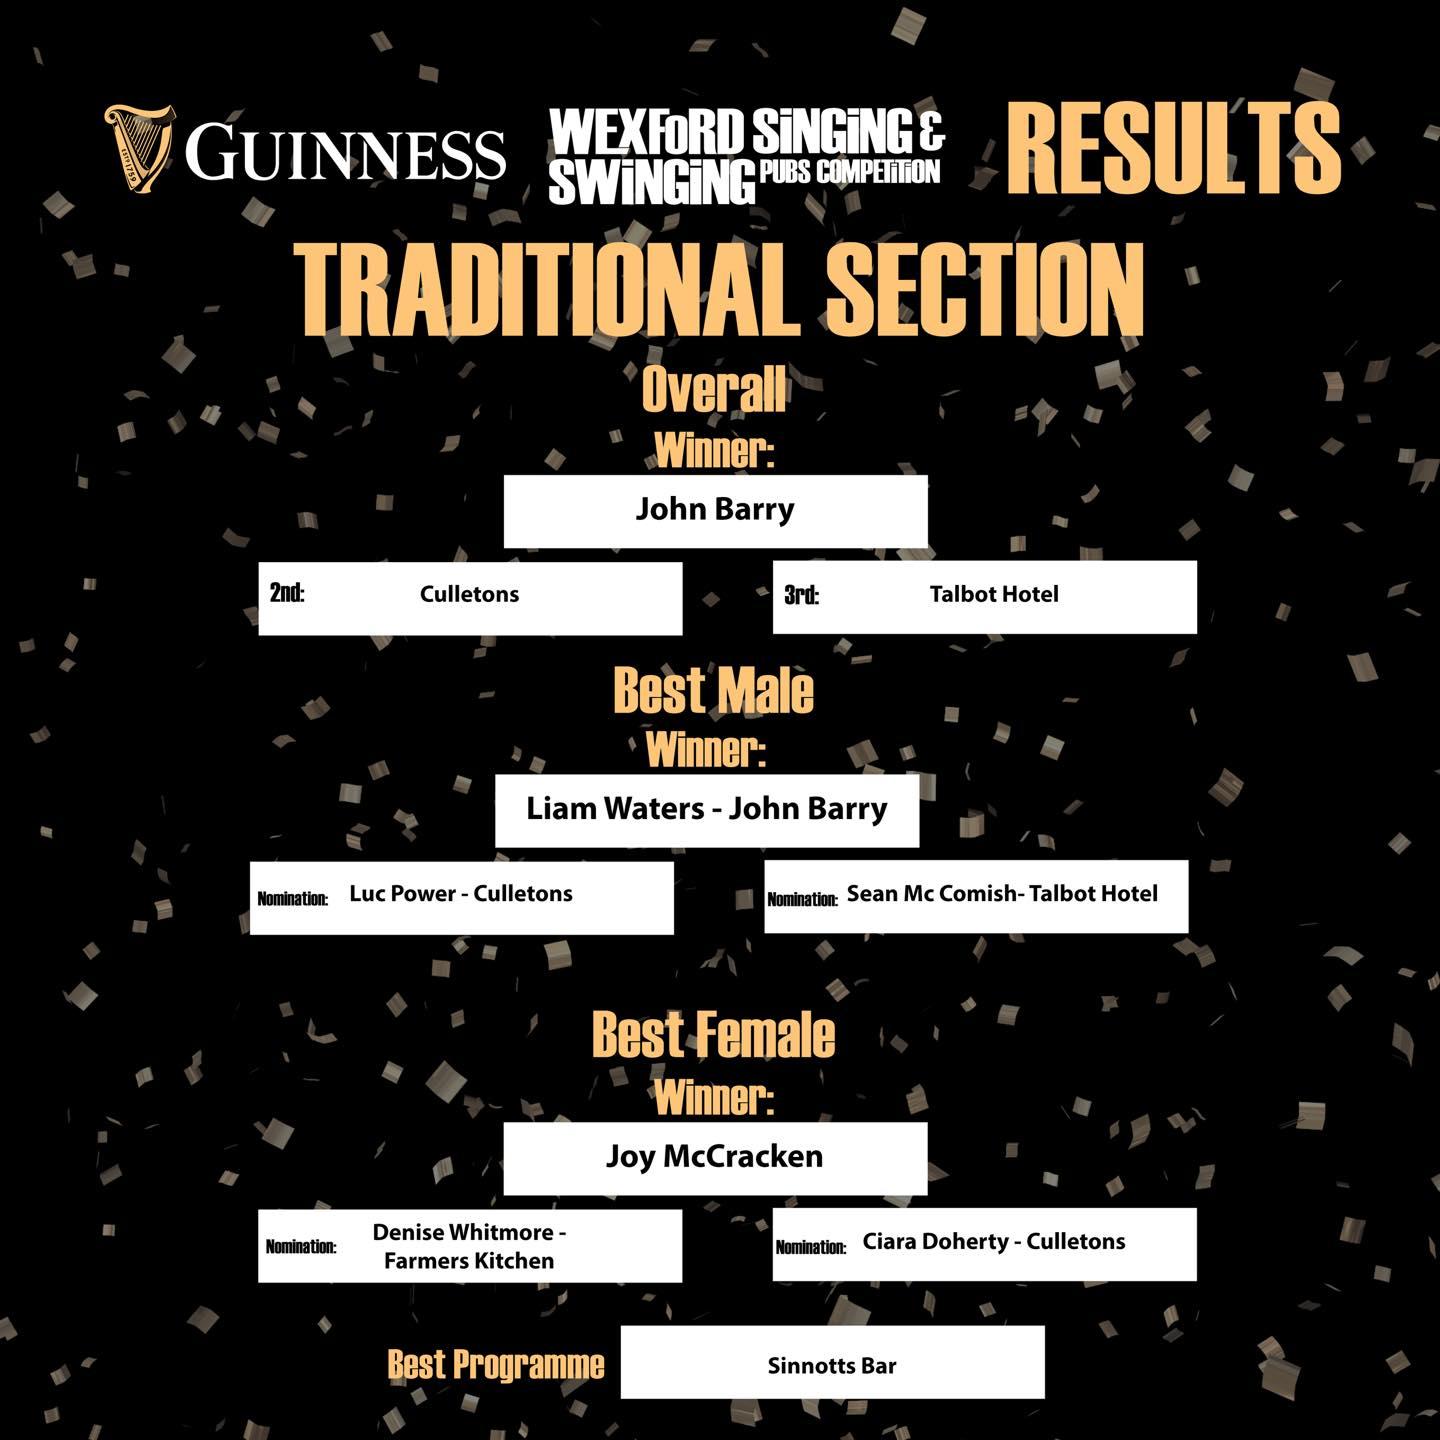 May be a graphic of text that says 'GUINNESS SWINGING PUBS COMPETITION WEXFORD SiNGiNG& RESULTS TRADITIONAL SECTION Overall Winner: John Barry Culletons 3rd: Talbot Hotel Best Male Winner: Liam Waters John Barry Nomination: LucPower-Culletons Culletons Nomination: Sean Mc Comish- ÛH Best Female Winner: Joy McCracken Nomination: Denise Whitmore- Farmers Kitchen Nomination: Ciara Doherty -Culletons Best Programme Sinnotts Bar'